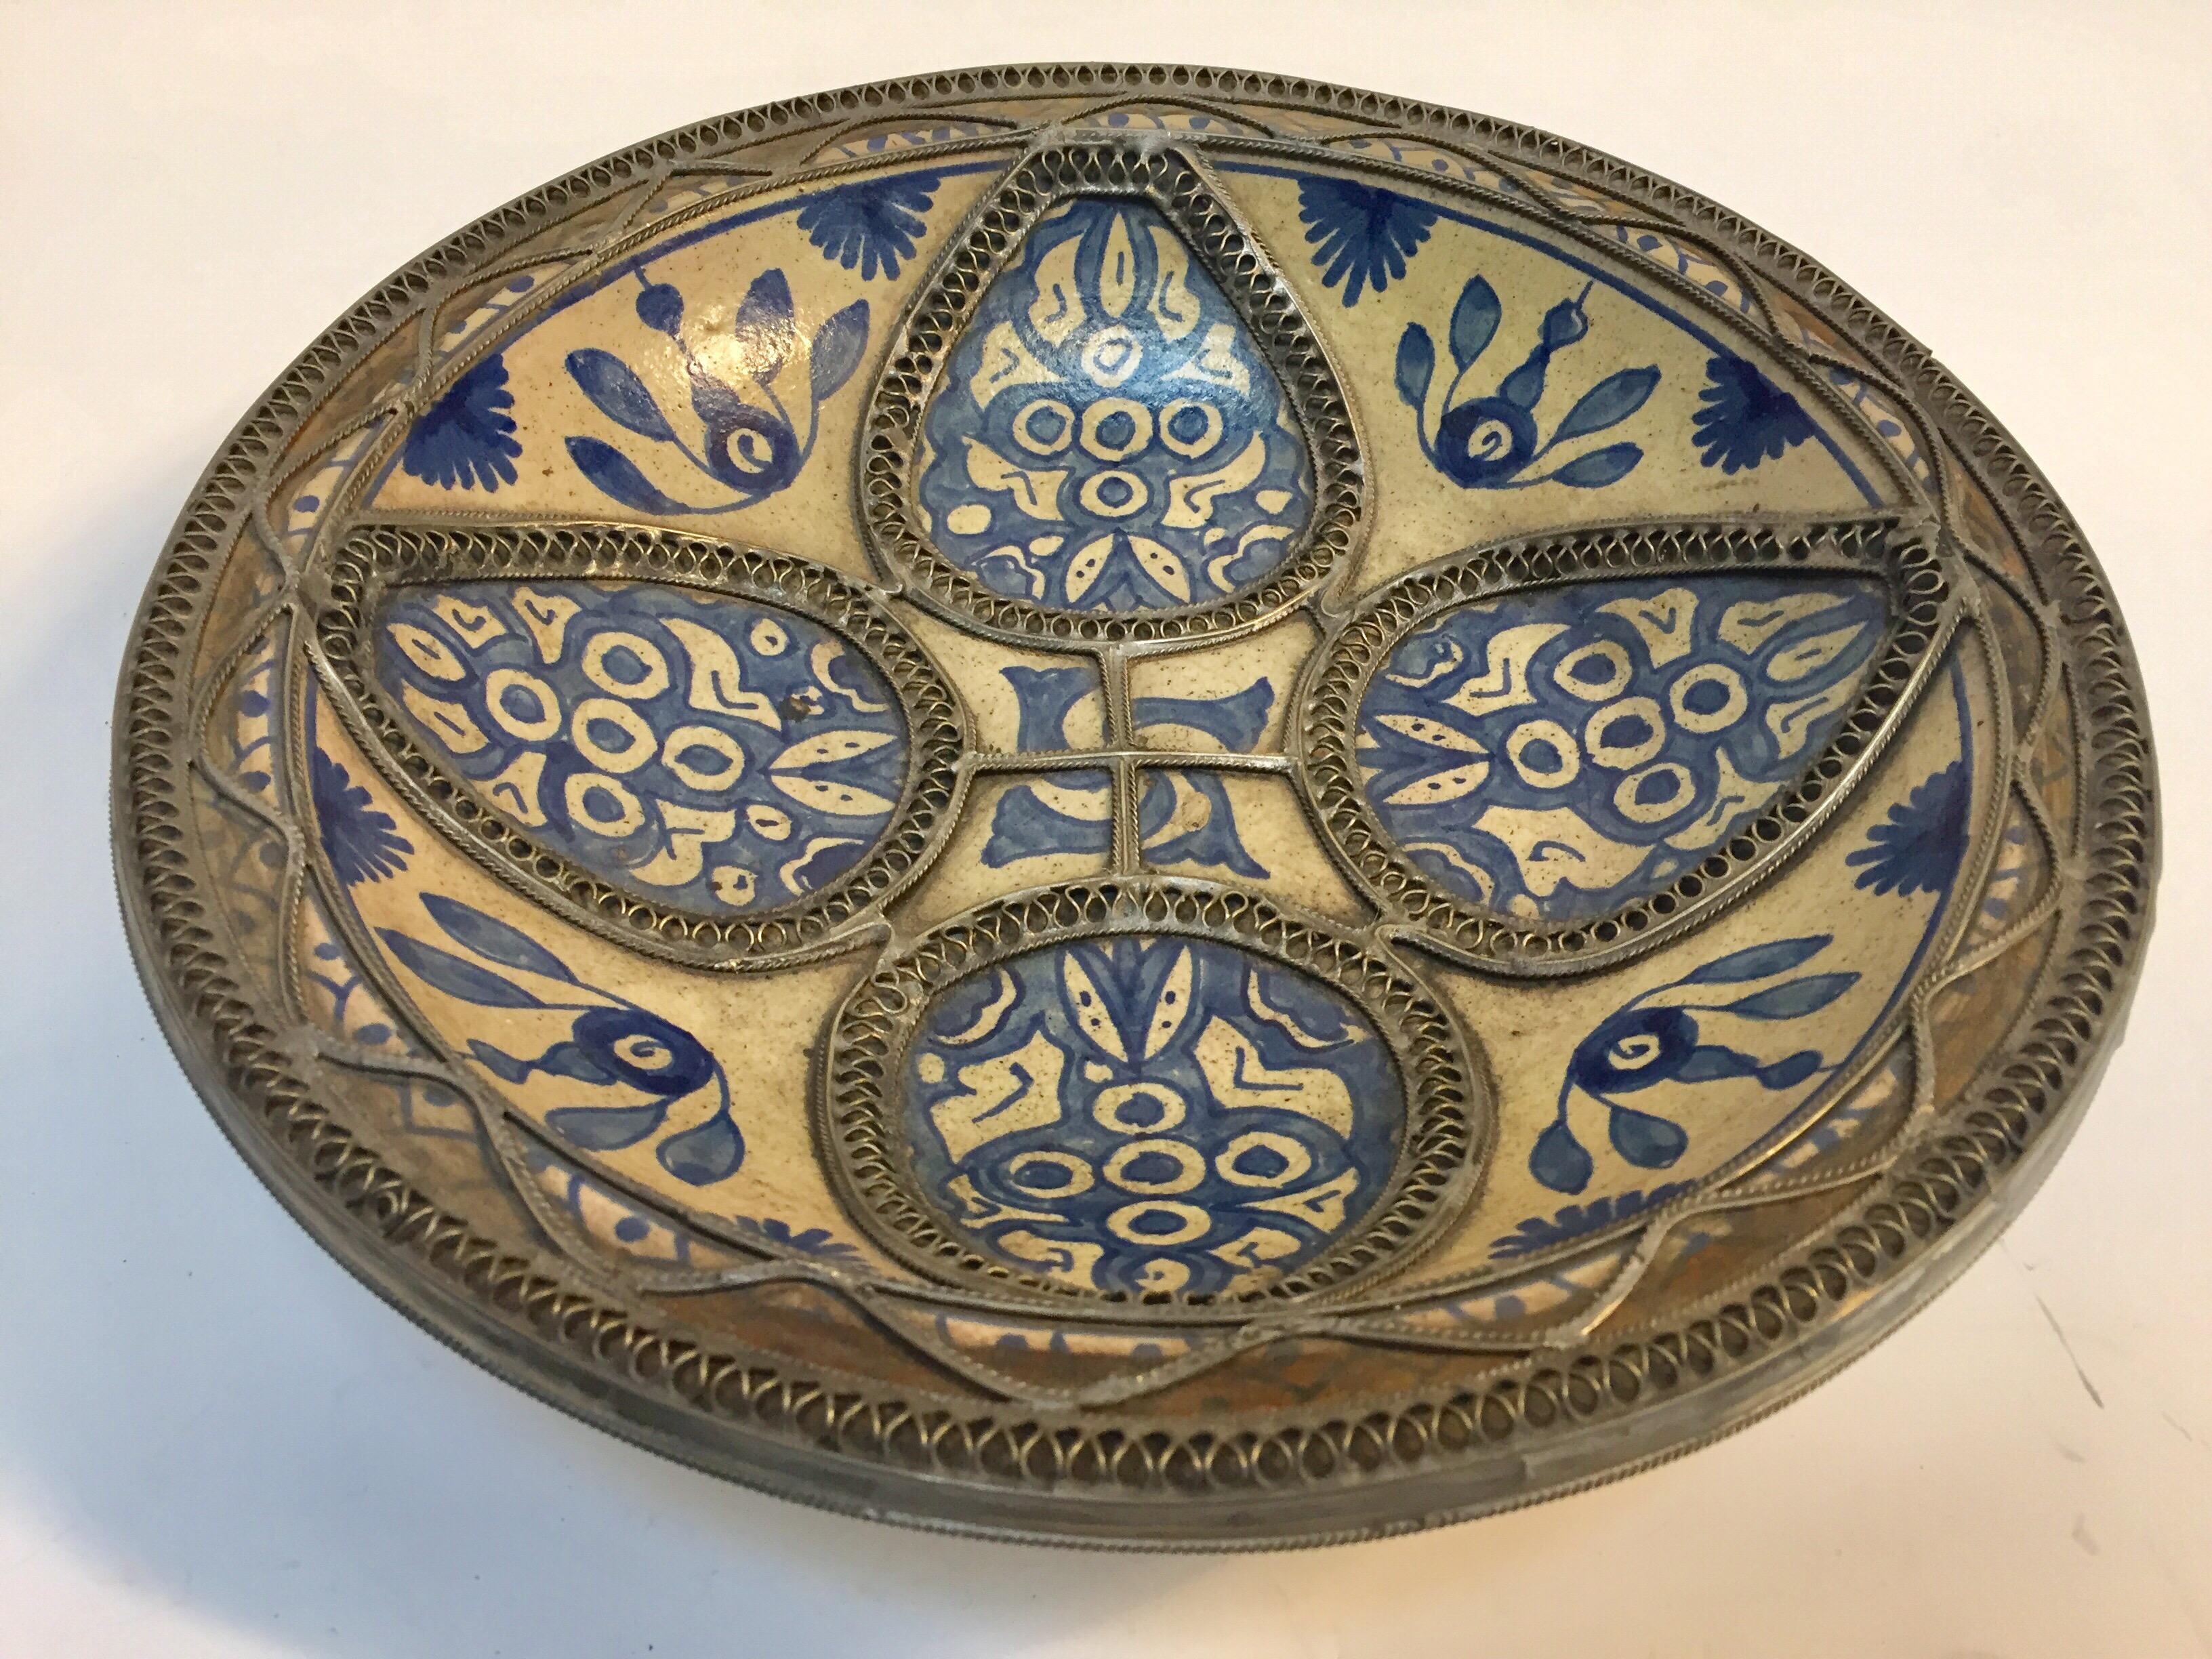 Handcrafted large Moroccan polychrome decorative ceramic plate from Fez. Bleu de Fez, very nice designs hand-painted by artist in Fez.
Geometrical and floral designs and adorned with nickel silver filigree designs.